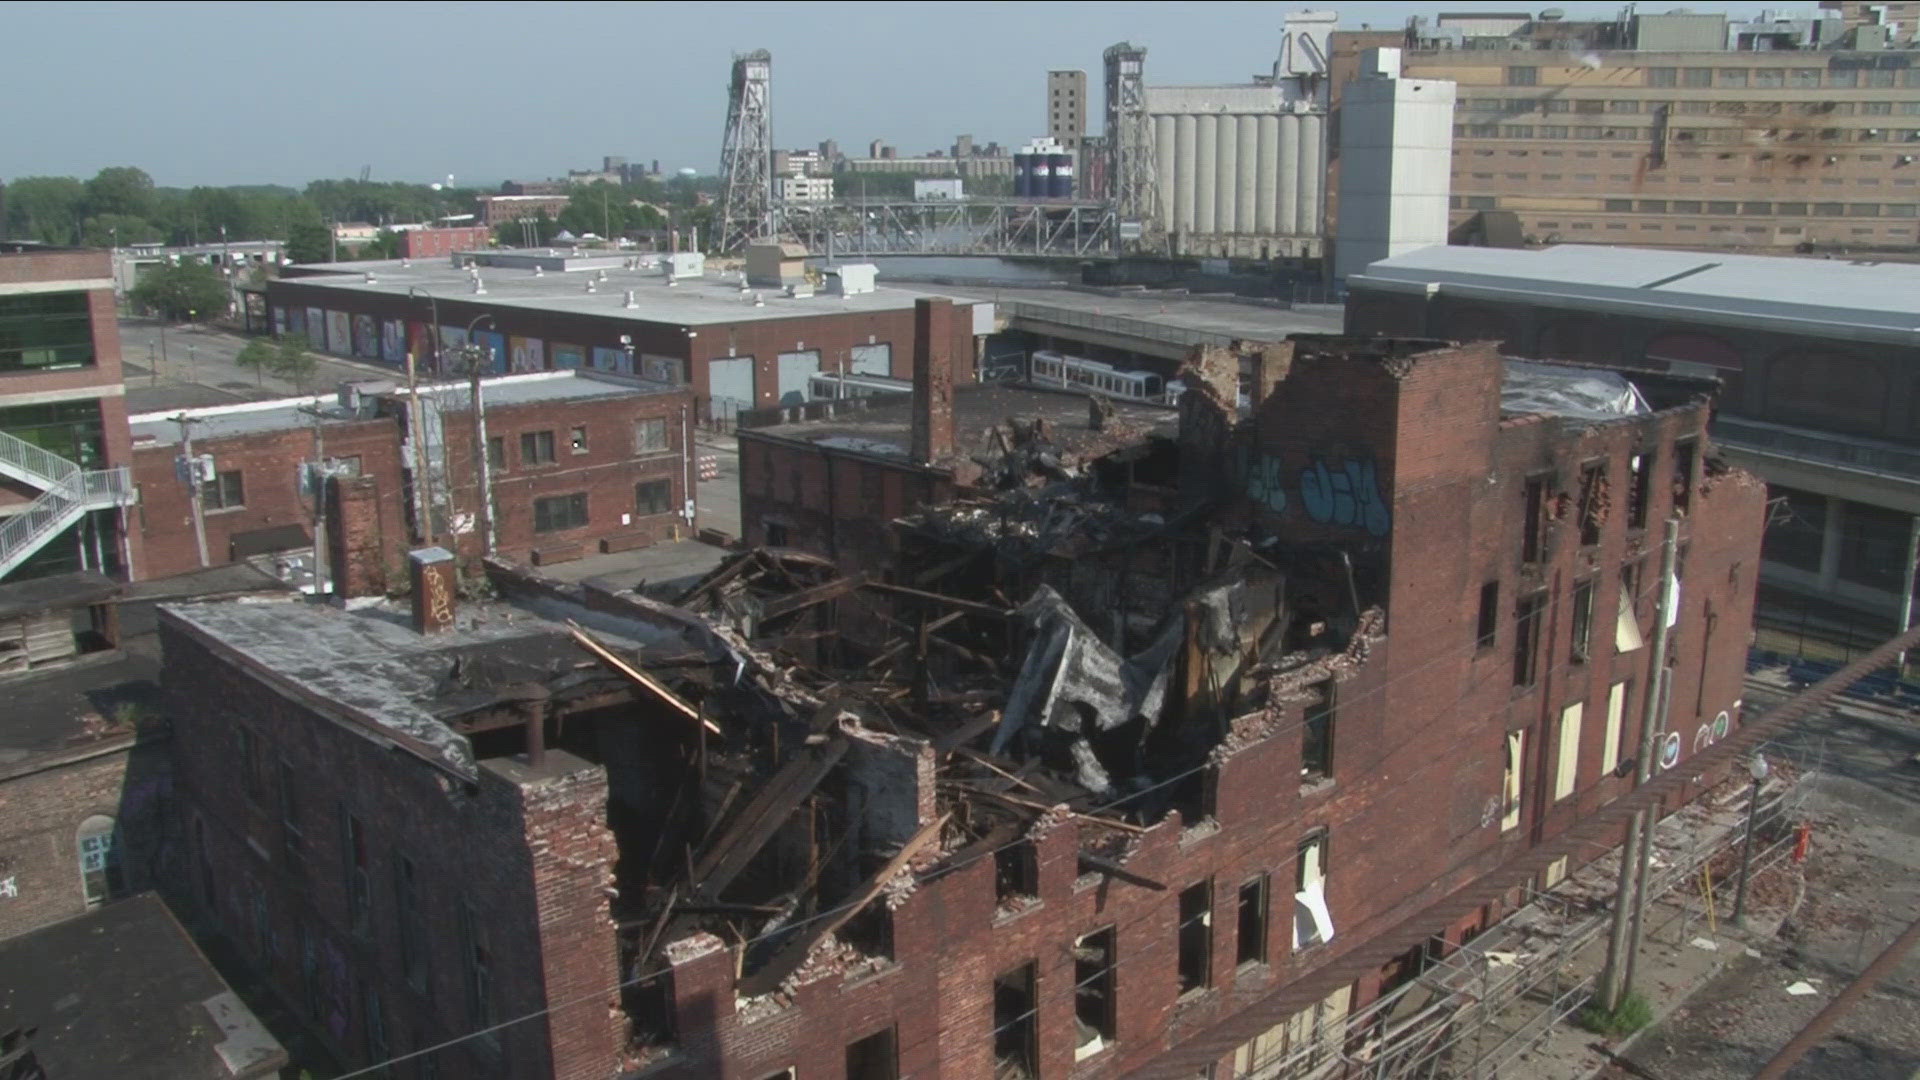 The building owner has fought for years to tear down the two cobblestone district buildings.  Now, that fire has gutted the structures, what will happen next?